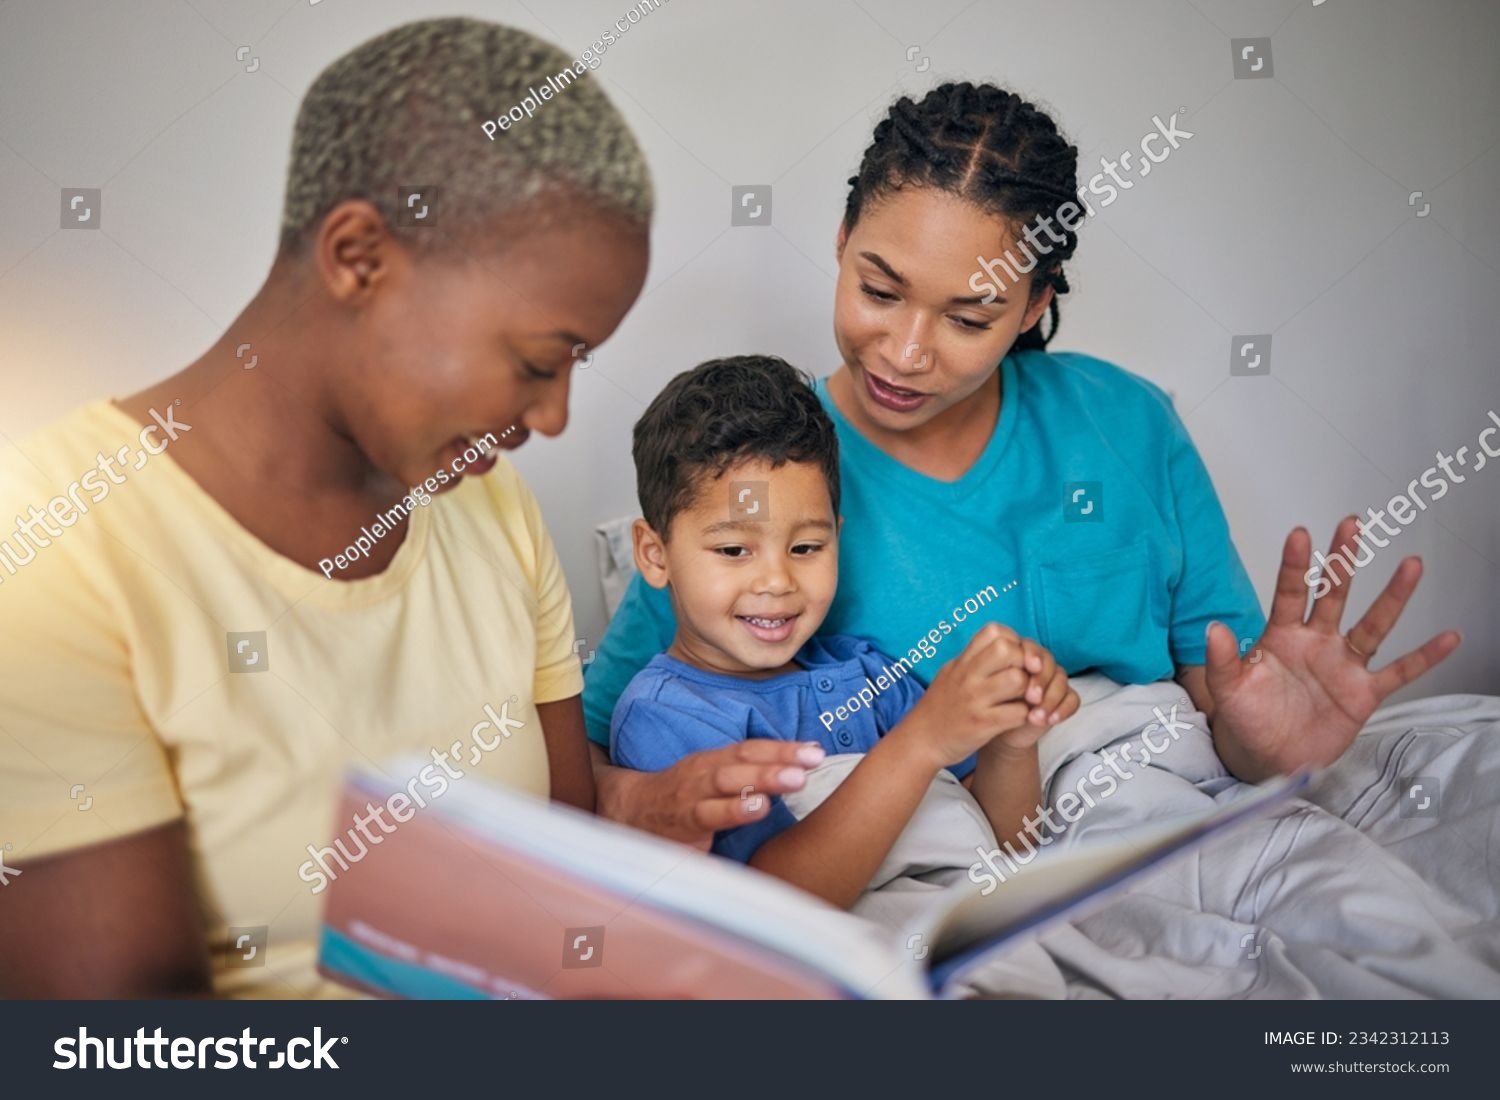 Reading, LGBT family and child with a book in bed for knowledge, education and learning. Adoption, lesbian or gay women or parents and foster kid together in home bedroom with story for quality time #2342312113